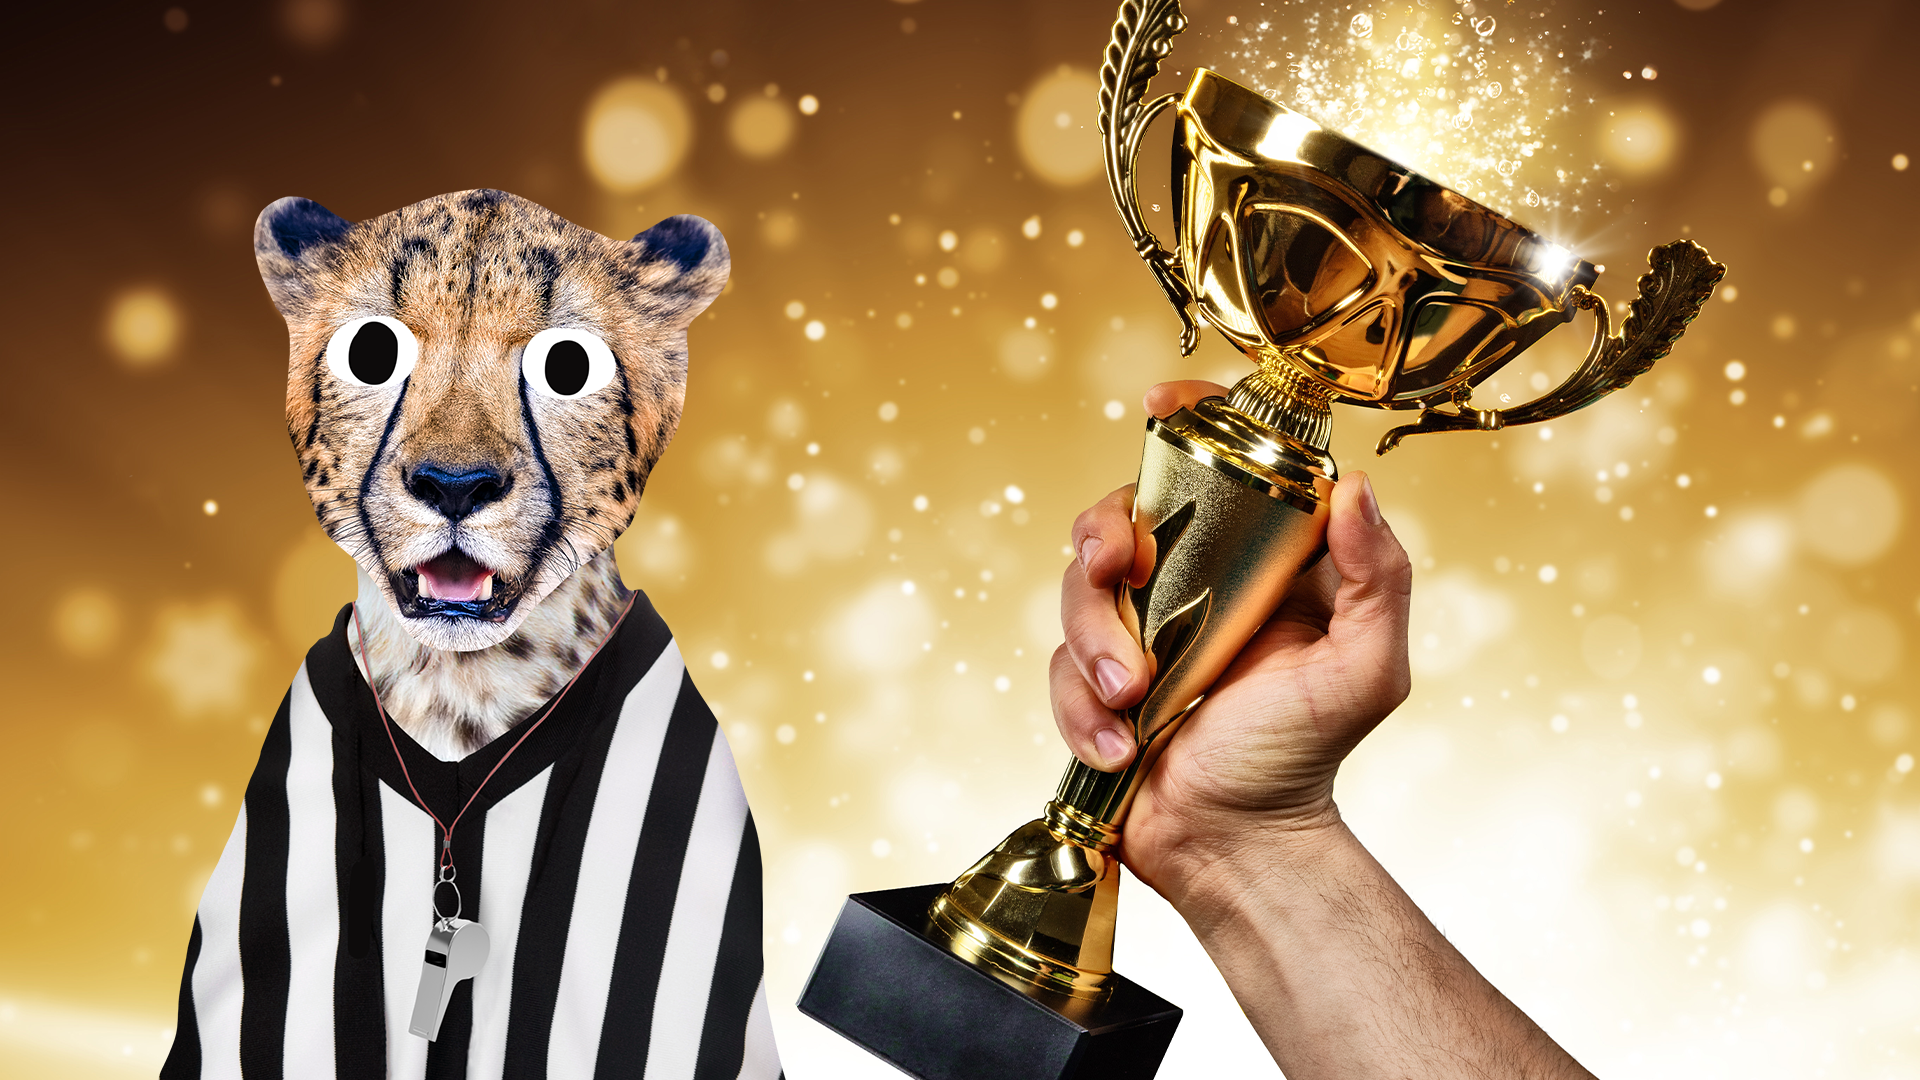 Cheetah referee and trophy